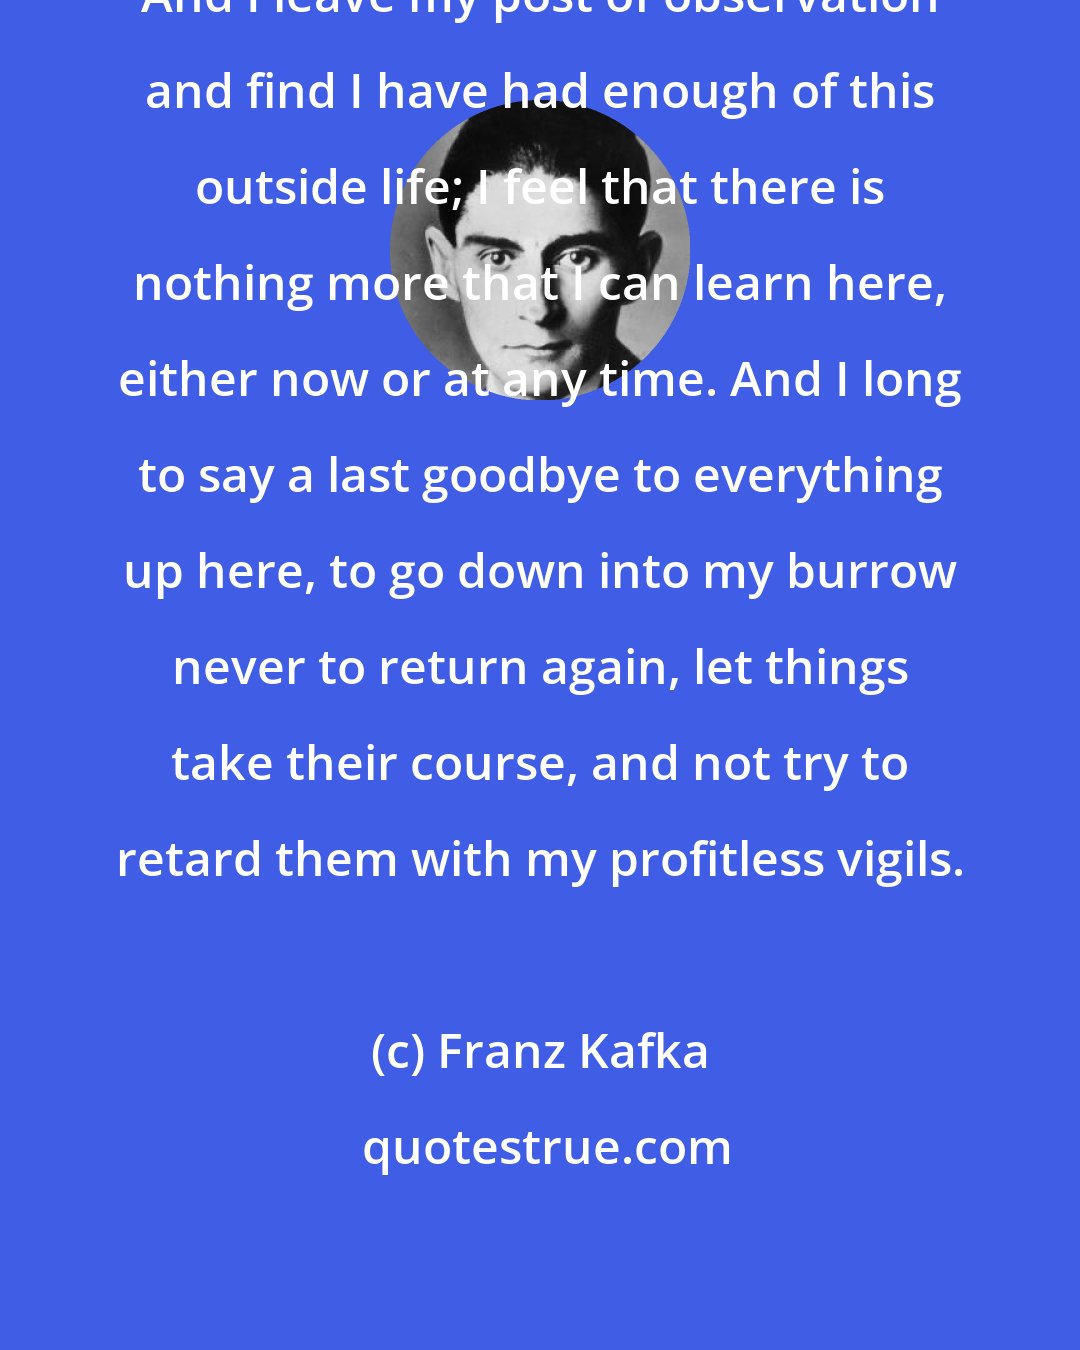 Franz Kafka: And I leave my post of observation and find I have had enough of this outside life; I feel that there is nothing more that I can learn here, either now or at any time. And I long to say a last goodbye to everything up here, to go down into my burrow never to return again, let things take their course, and not try to retard them with my profitless vigils.